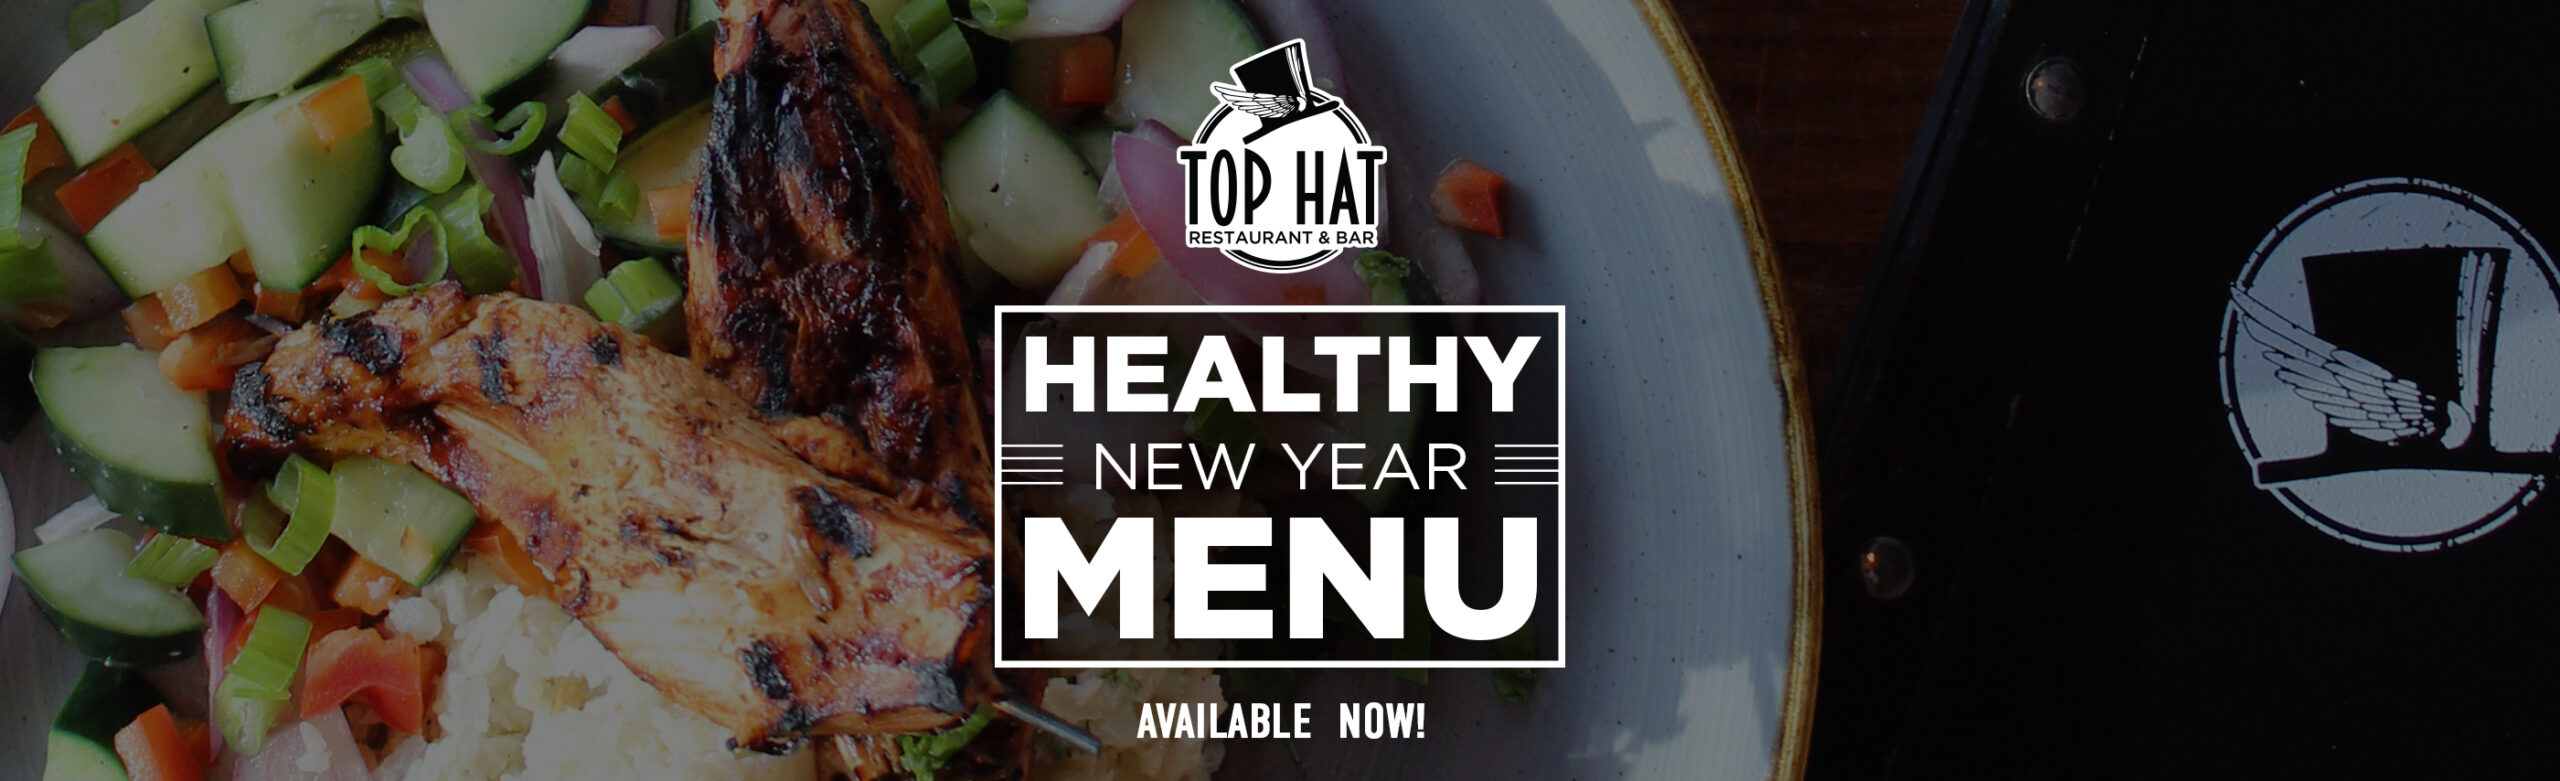 Top Hat Adds Healthy Specials in Time For New Year Image